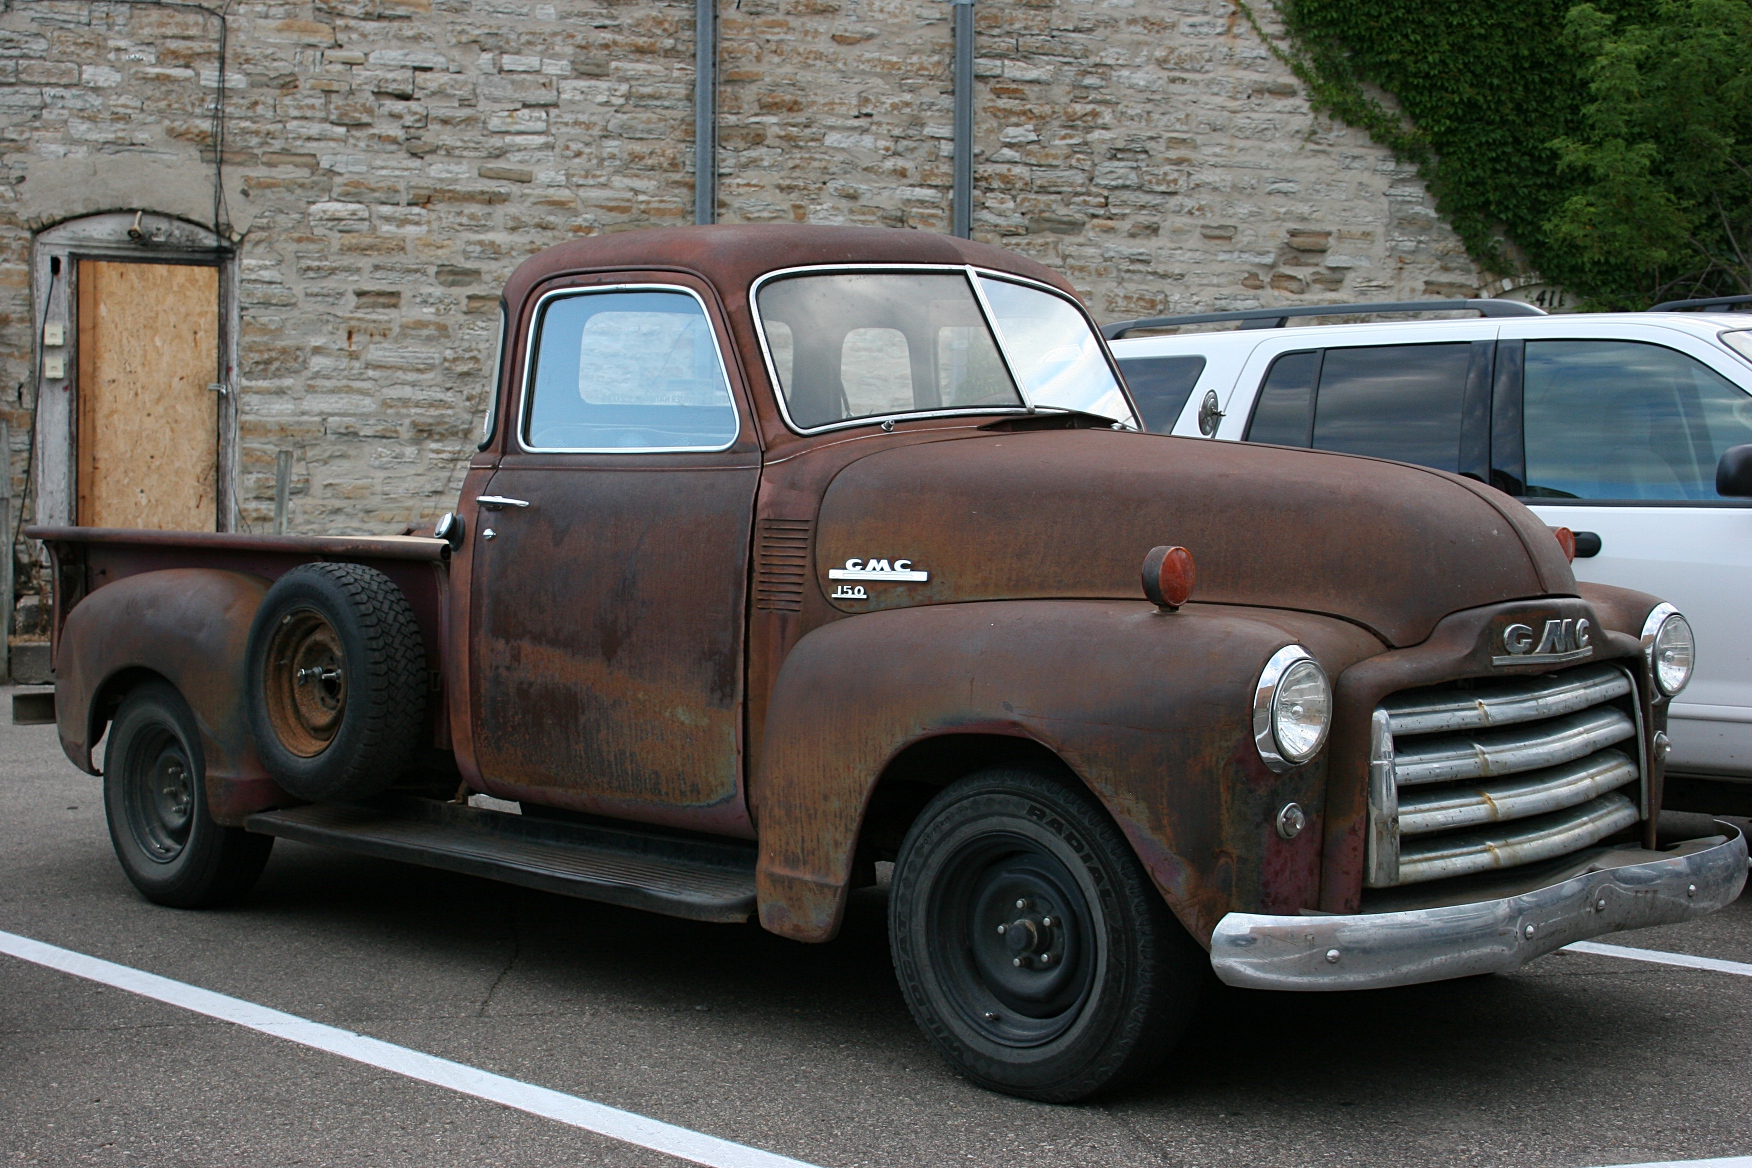 gmc-pick-up-truck-from-the-1950s-side-view.jpg